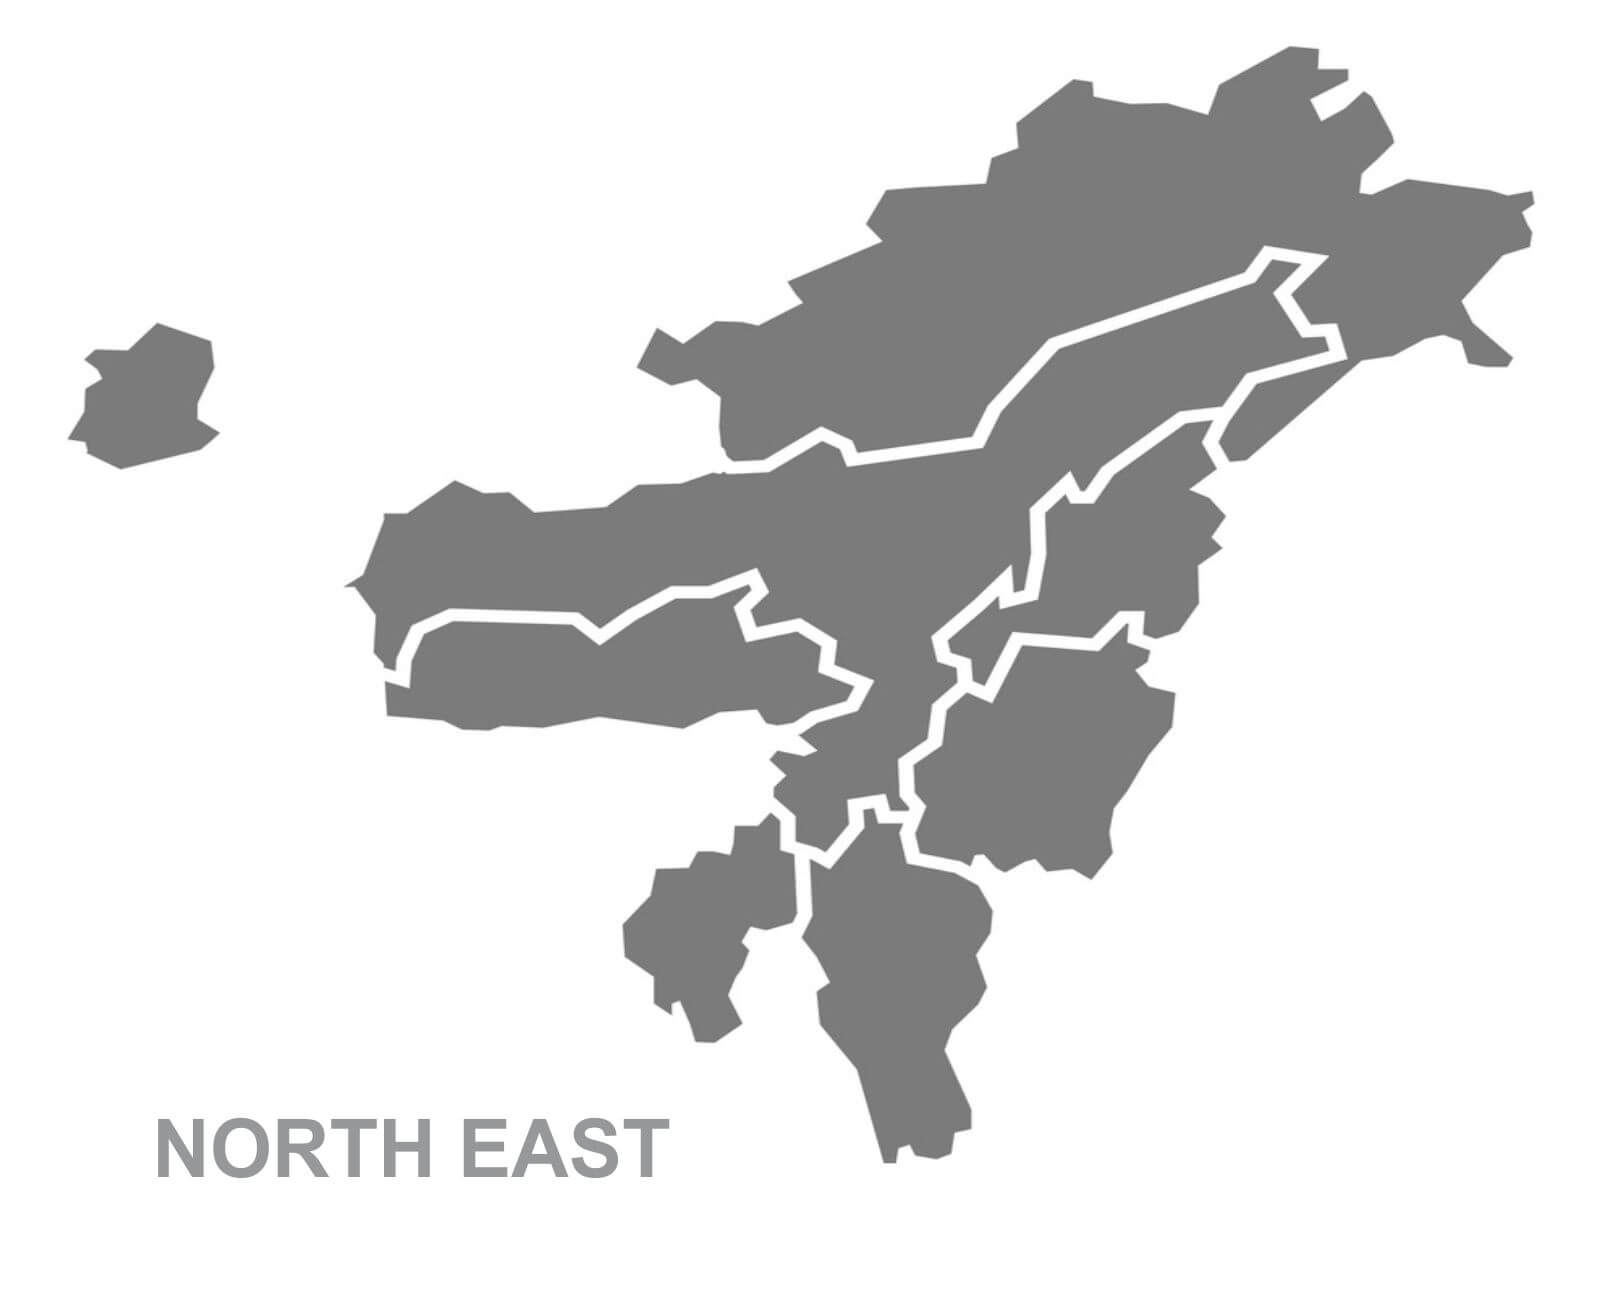 NORTH EAST